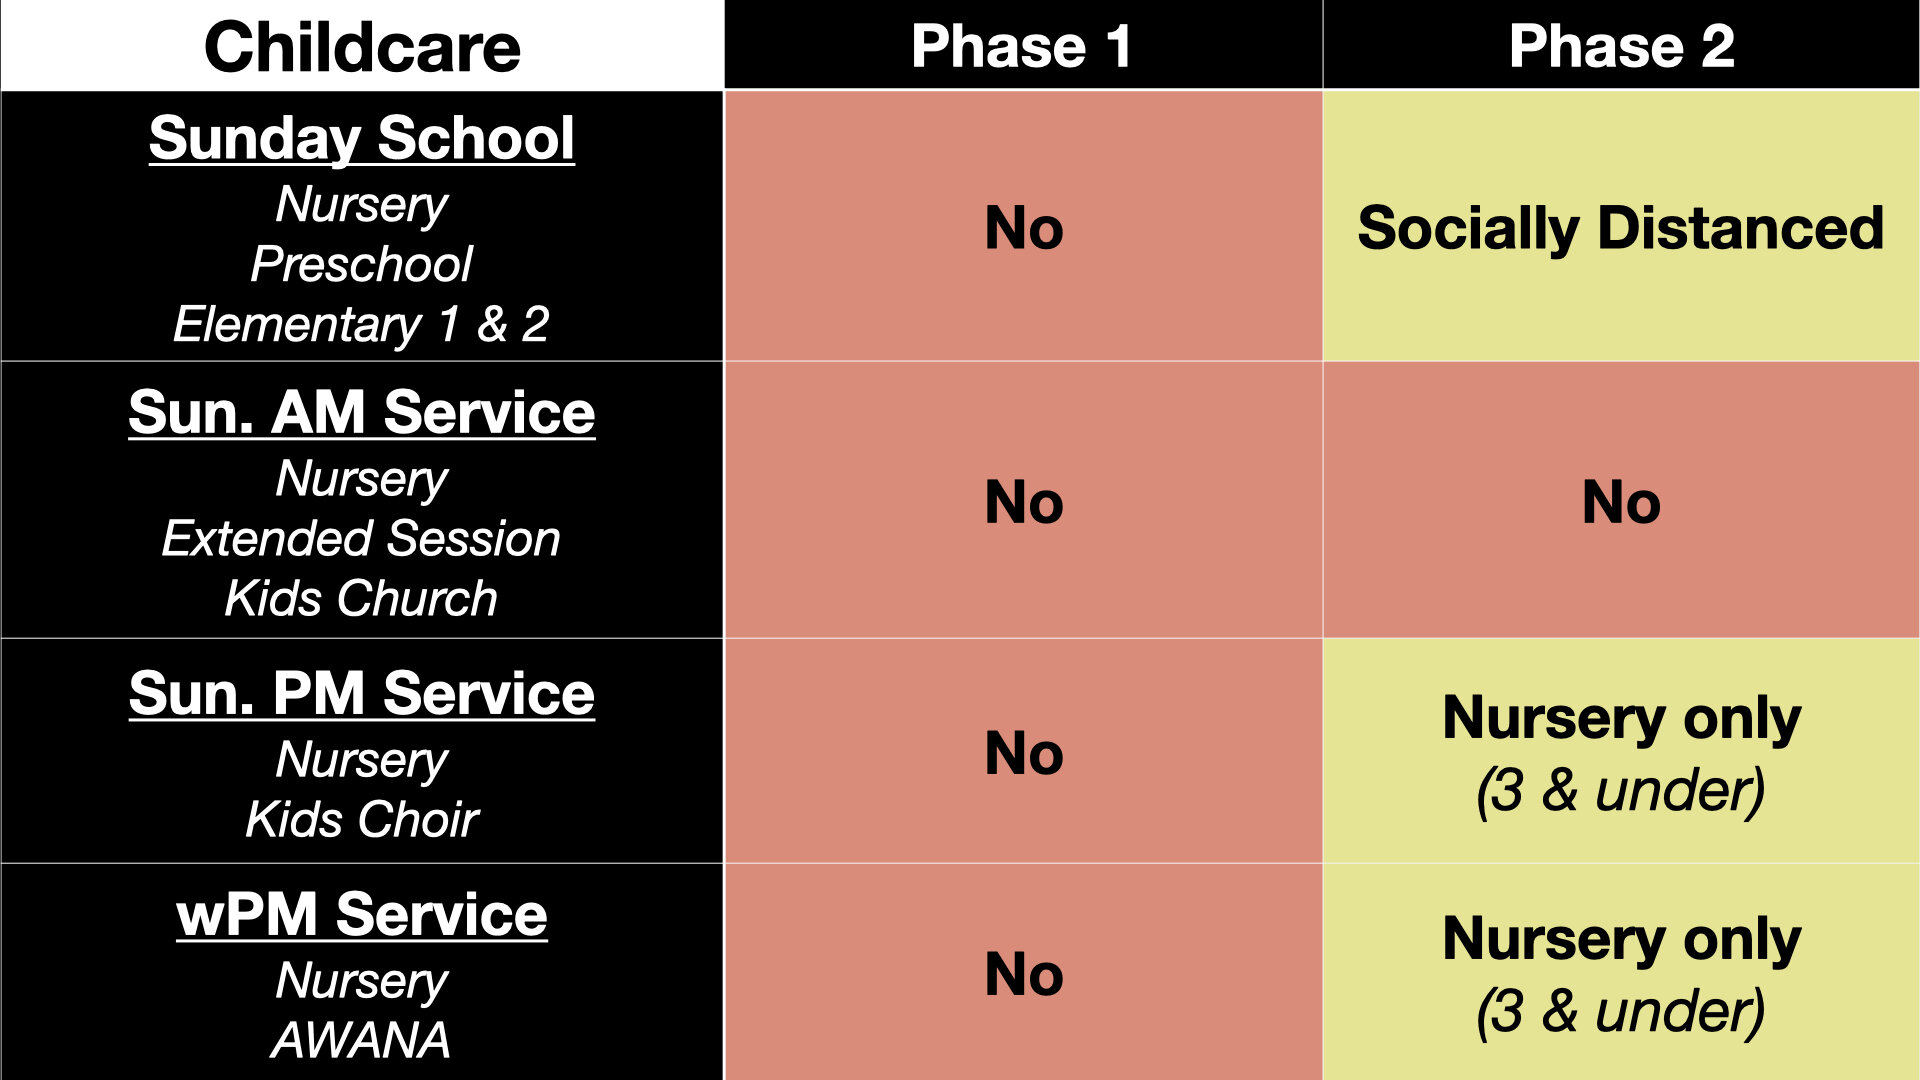 What will childcare look like in Phase 2?